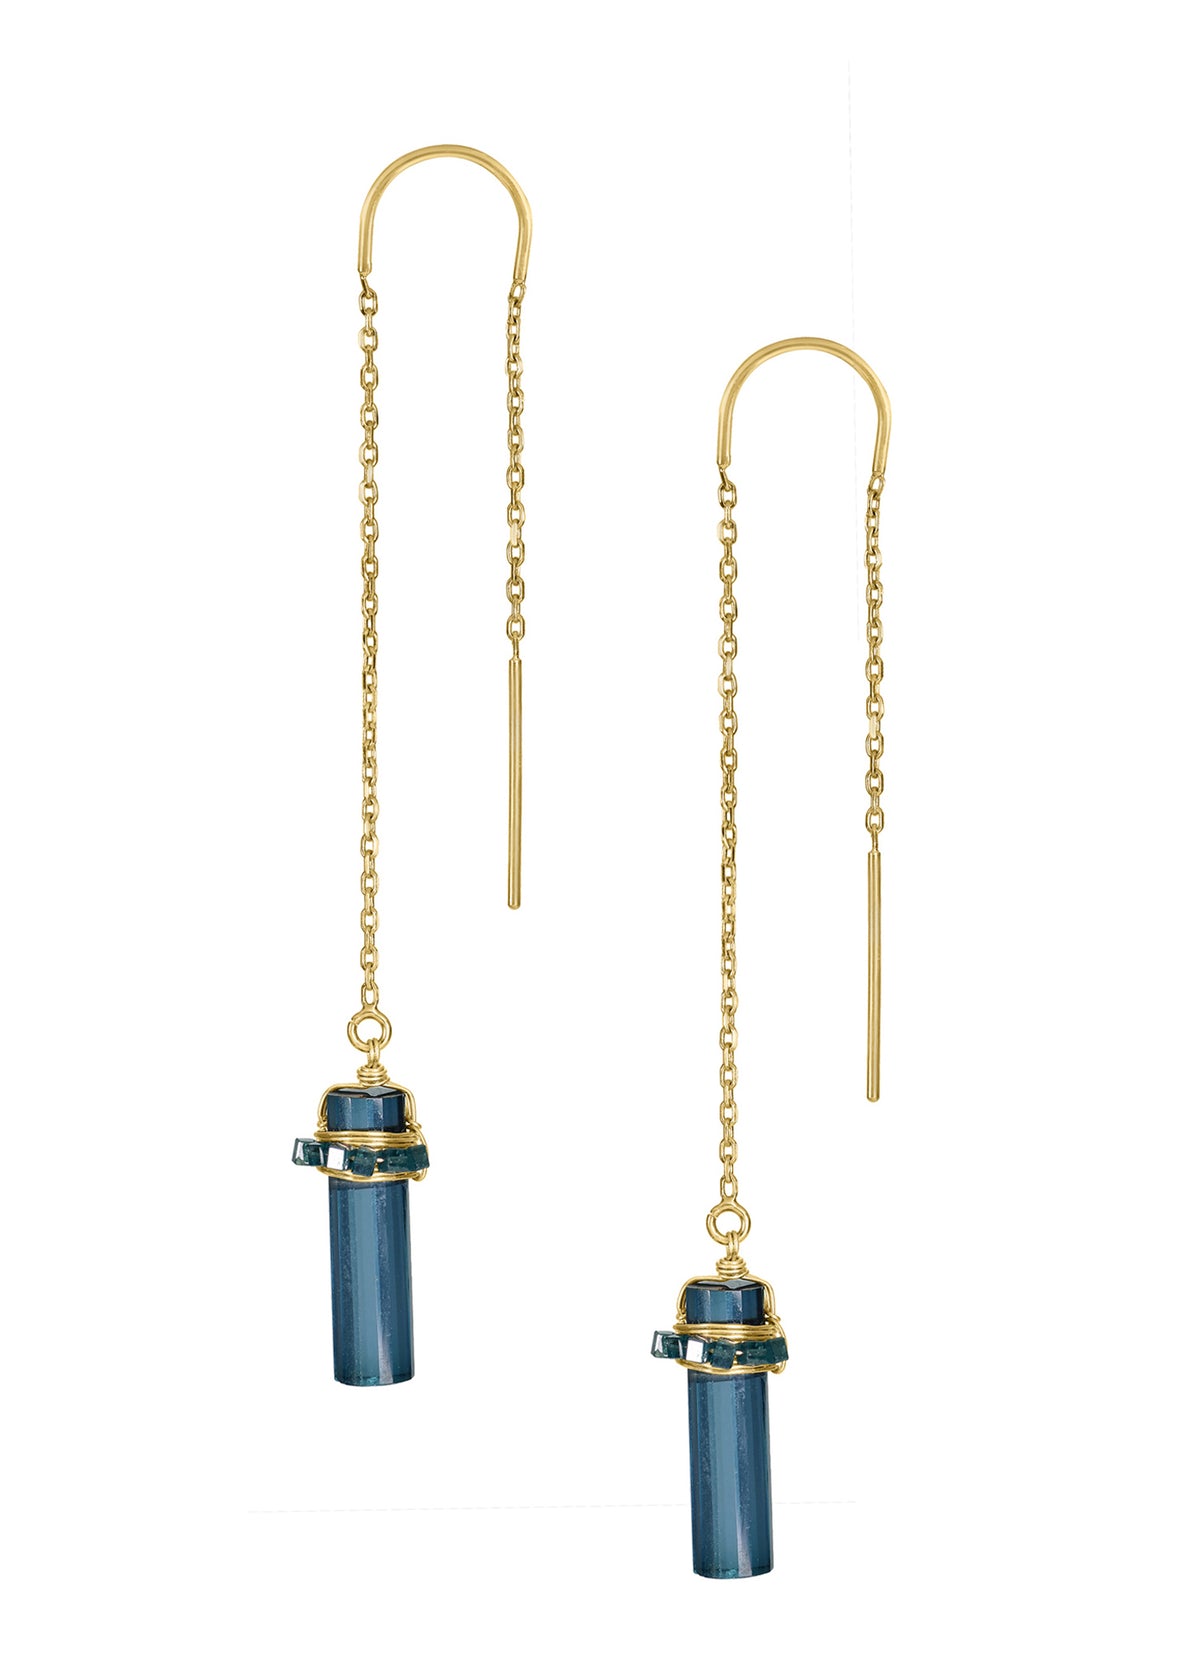 Diamond London blue quartz 14k gold Earrings measure 4&quot; in length (including ear wires) and 3/16&quot; in width Handmade in our Los Angeles studio